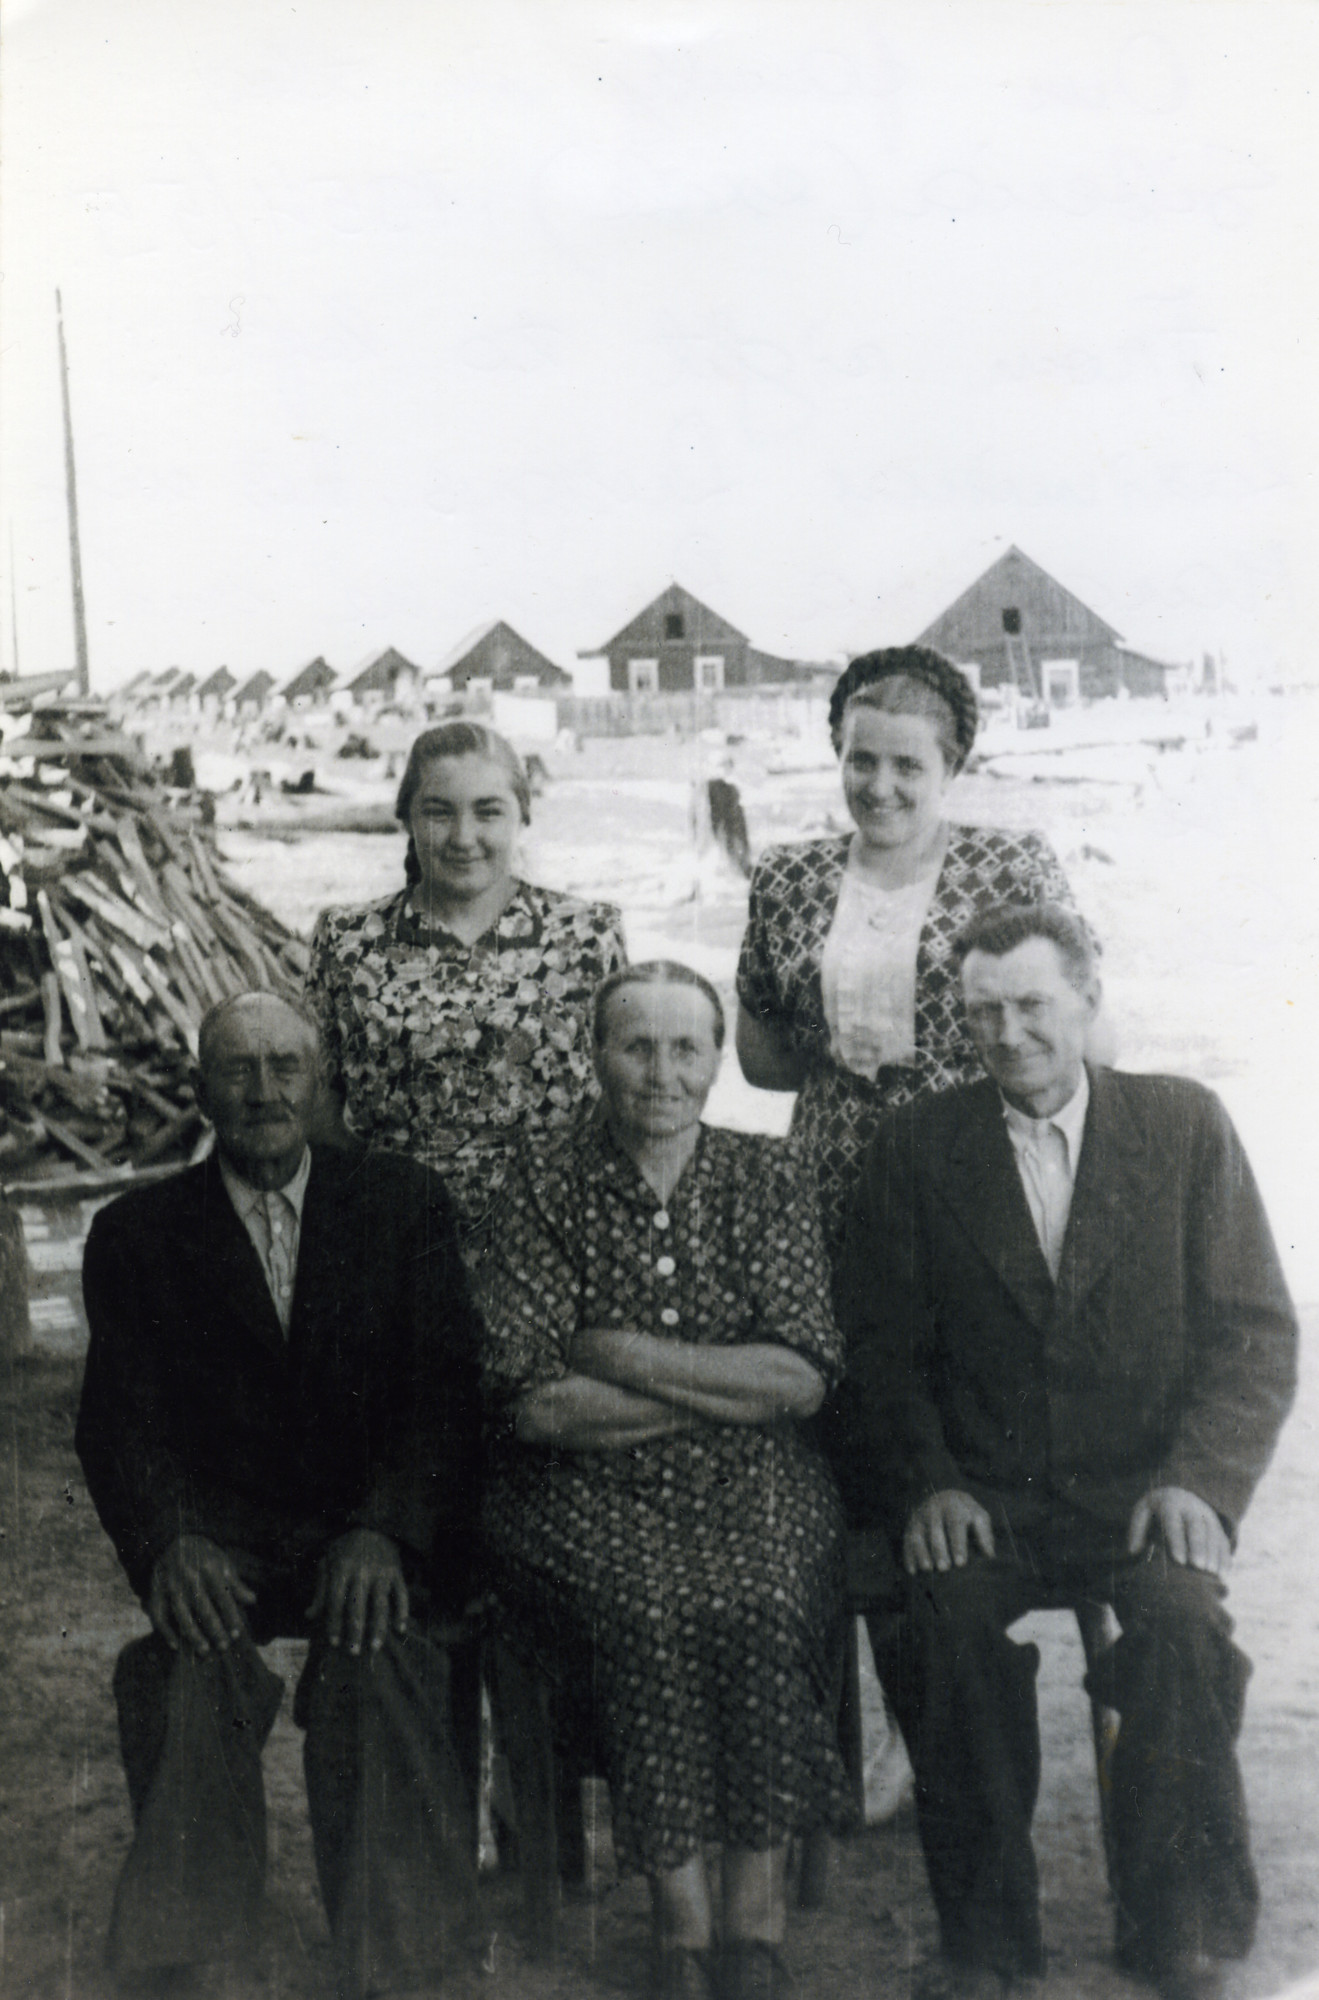 A Lithuanian rescuer family, while in exile in Siberia years later.

Pictured are (front, right to left): Kazimieras Ruzgys, his wife Marcijona Ruzgien, his brother Juszap[?], and (back, left to right) his daughter Stasele, and Genovaite.